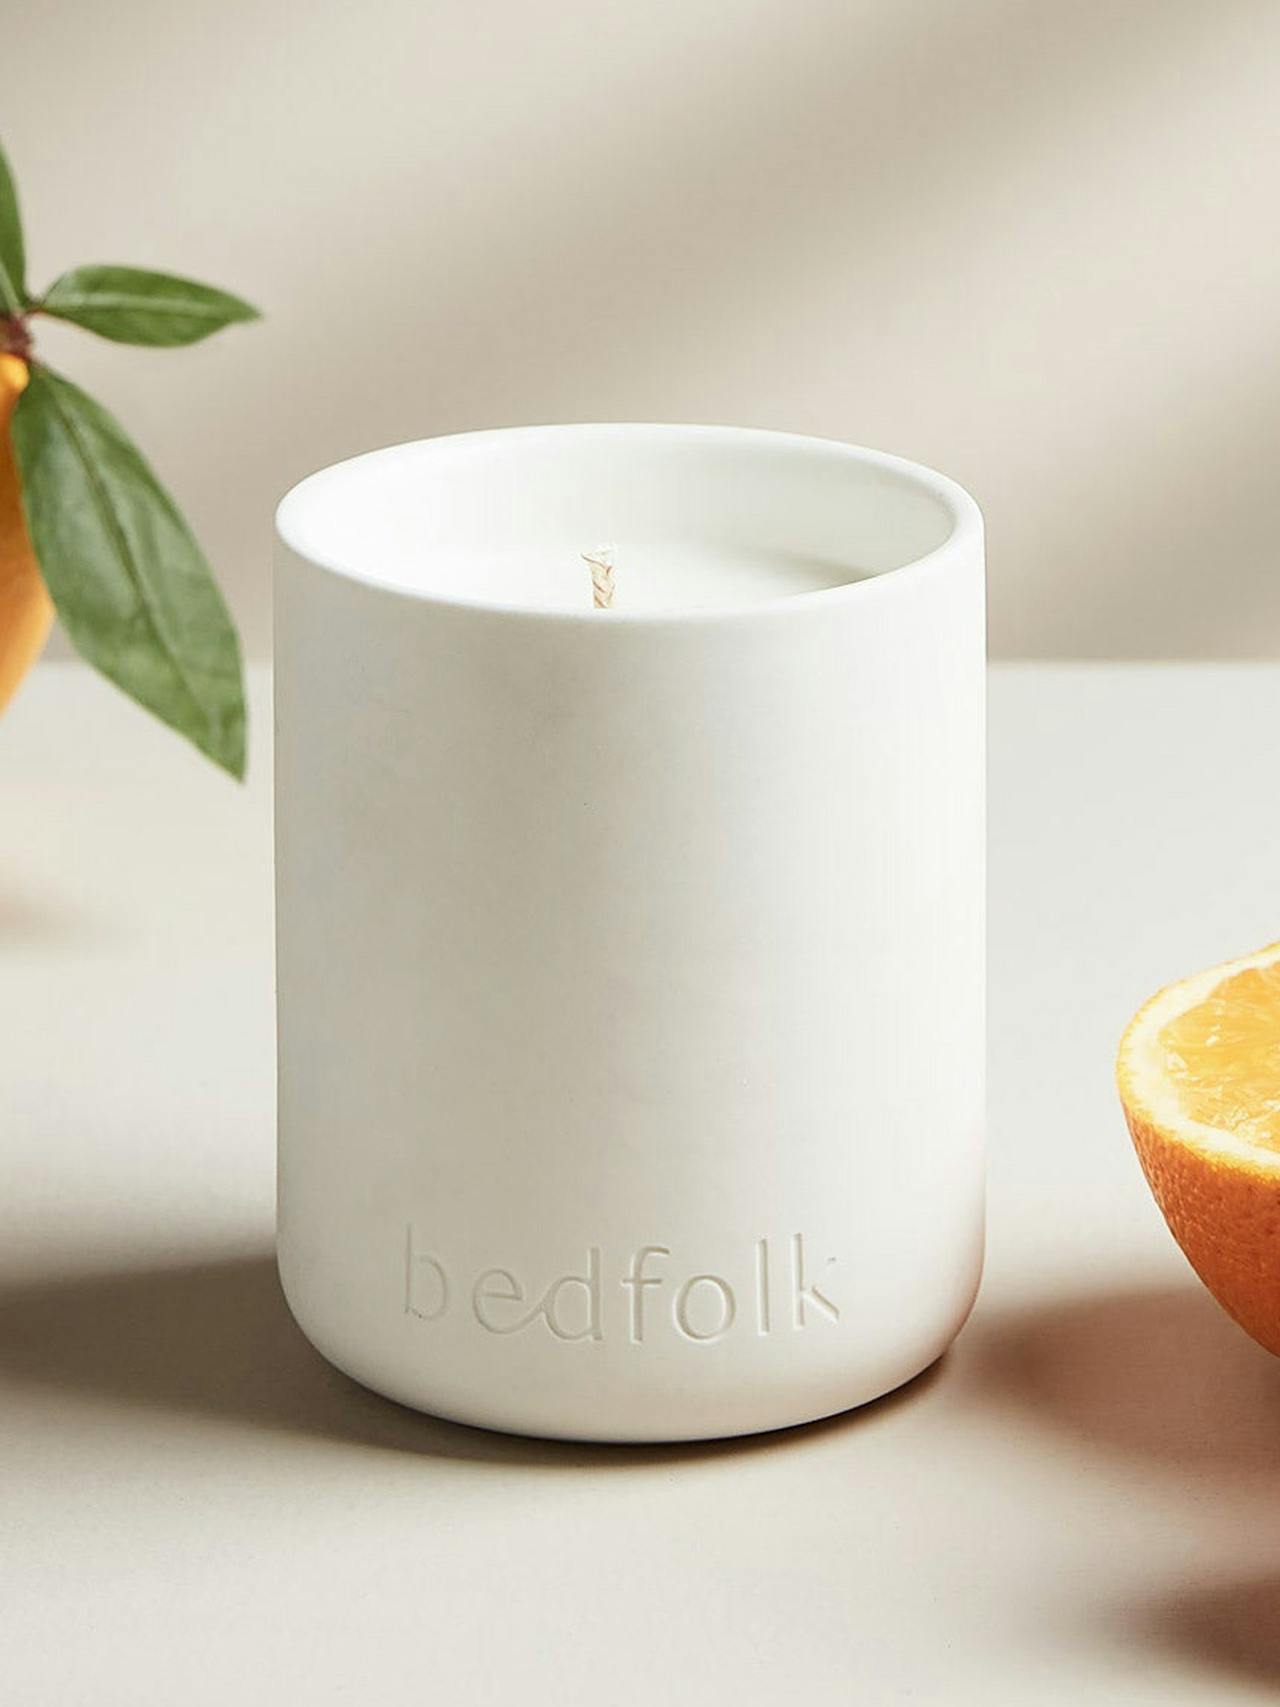 The Comfort candle